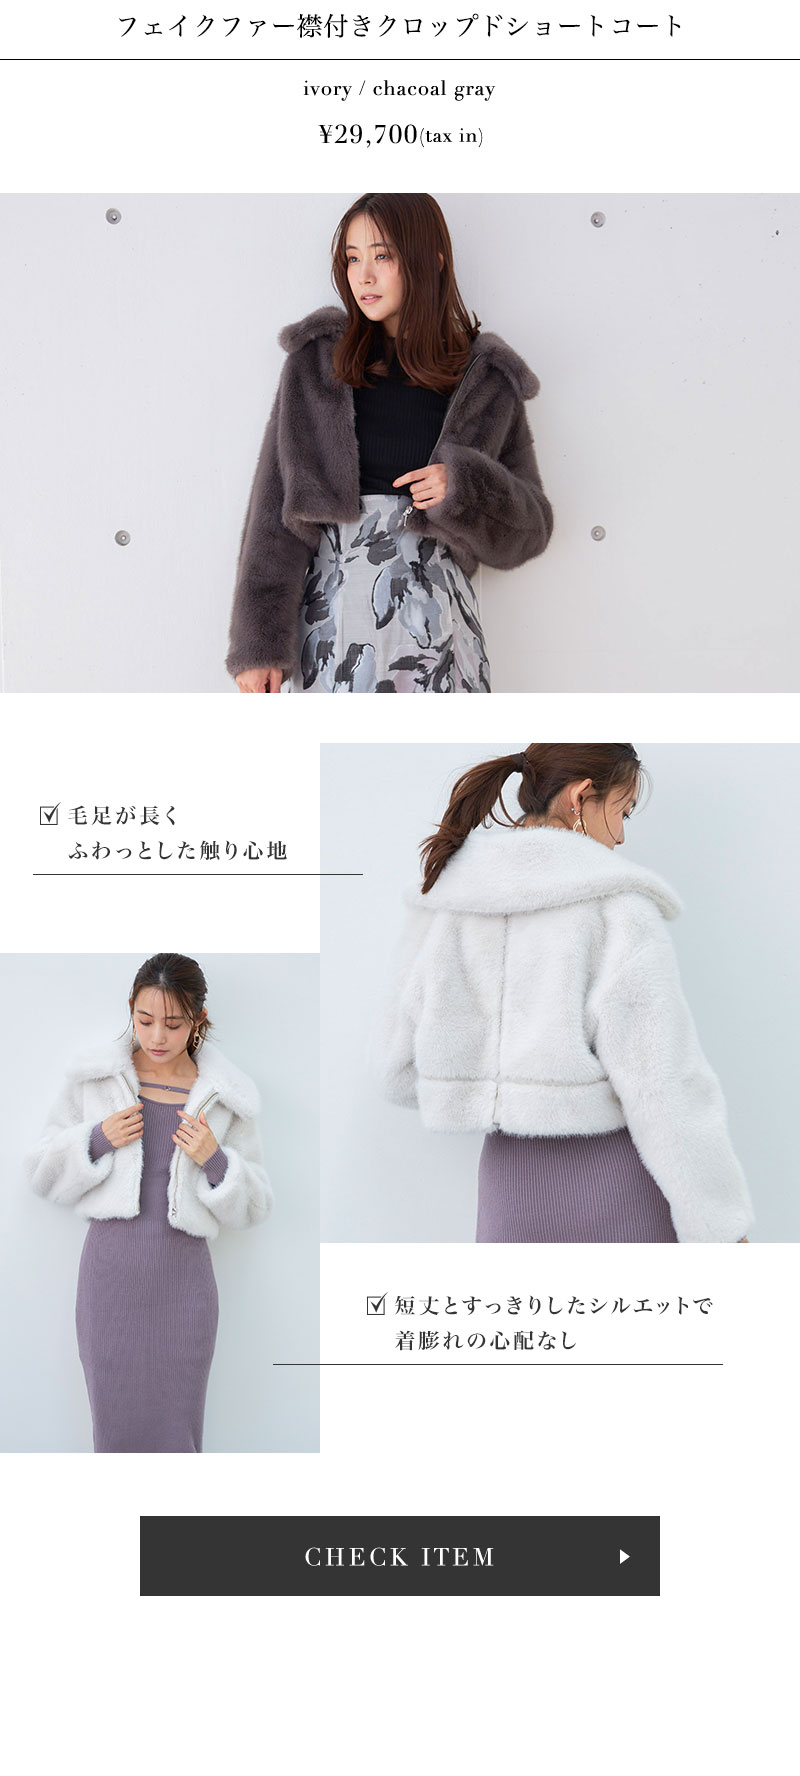 2023 Winter OUTER COLLECTION